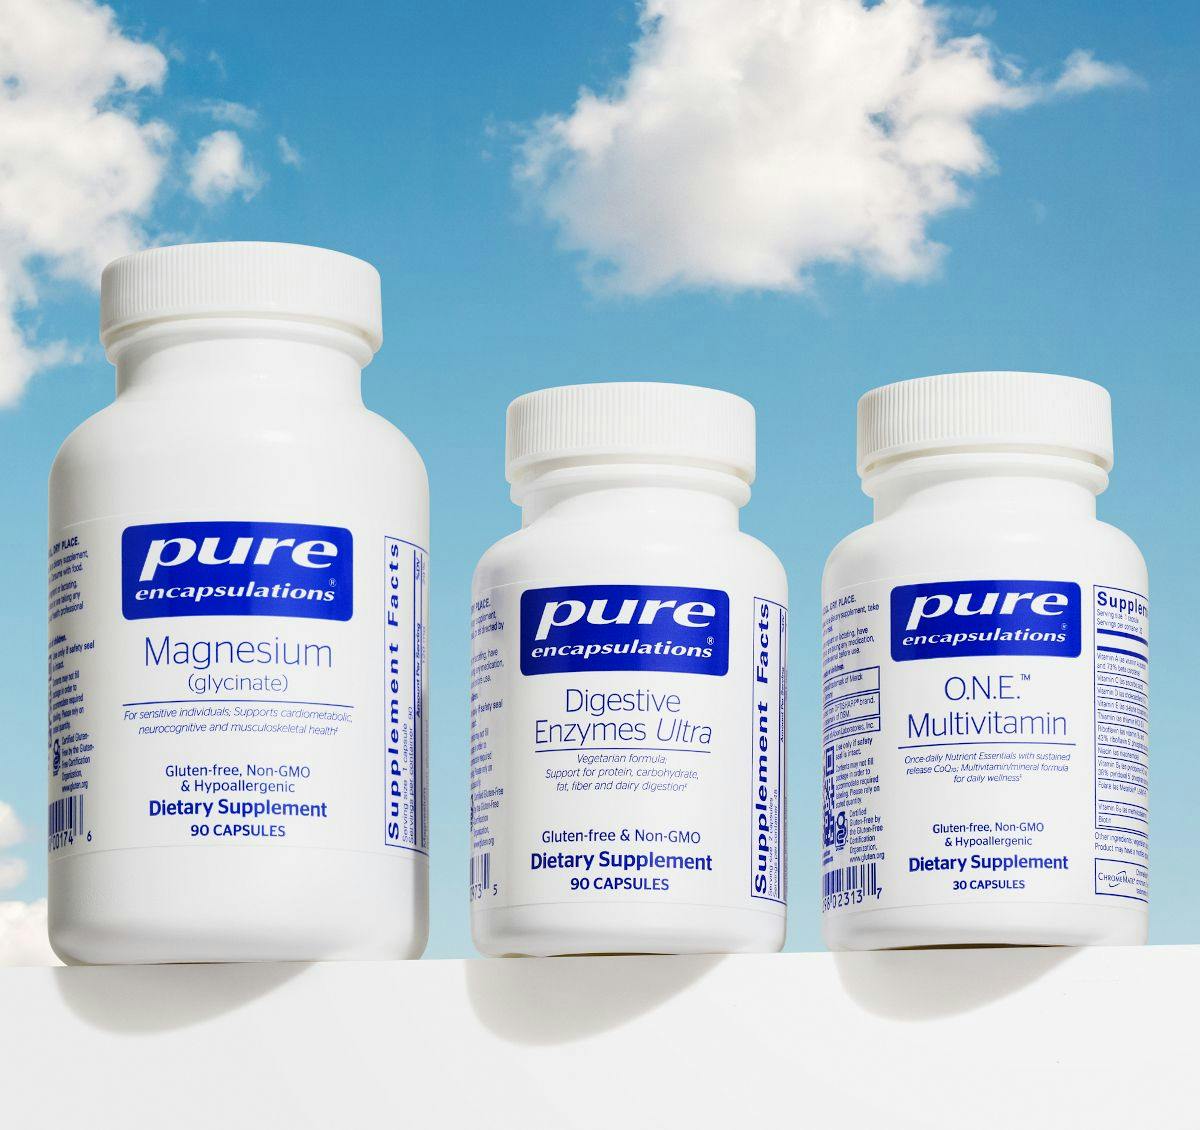 Pure Encapsulations products. Image courtesy of The Vitamin Shoppe. 